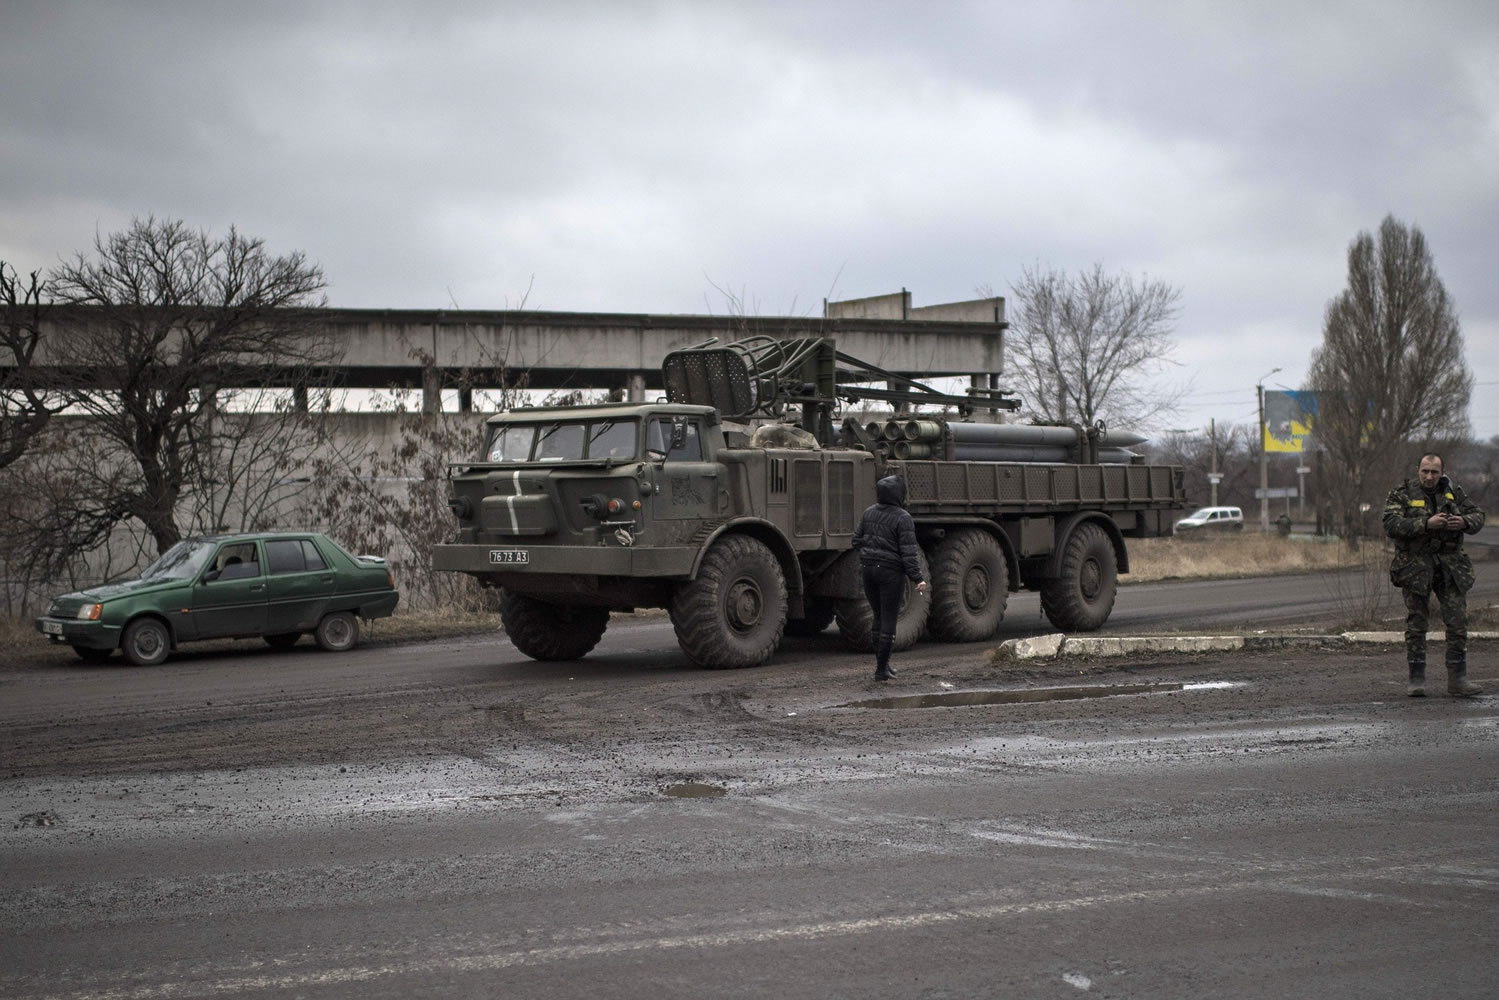 A Ukrainian military vehicle drives on a road near Artemivsk, eastern Ukraine, on Friday. Pro-Russia rebels and the Ukrainian authorities agreed Friday on a humanitarian corridor to evacuate civilians from the epicenter of fighting in eastern Ukraine as German and French leaders prepared to bring their peace plan to Moscow.